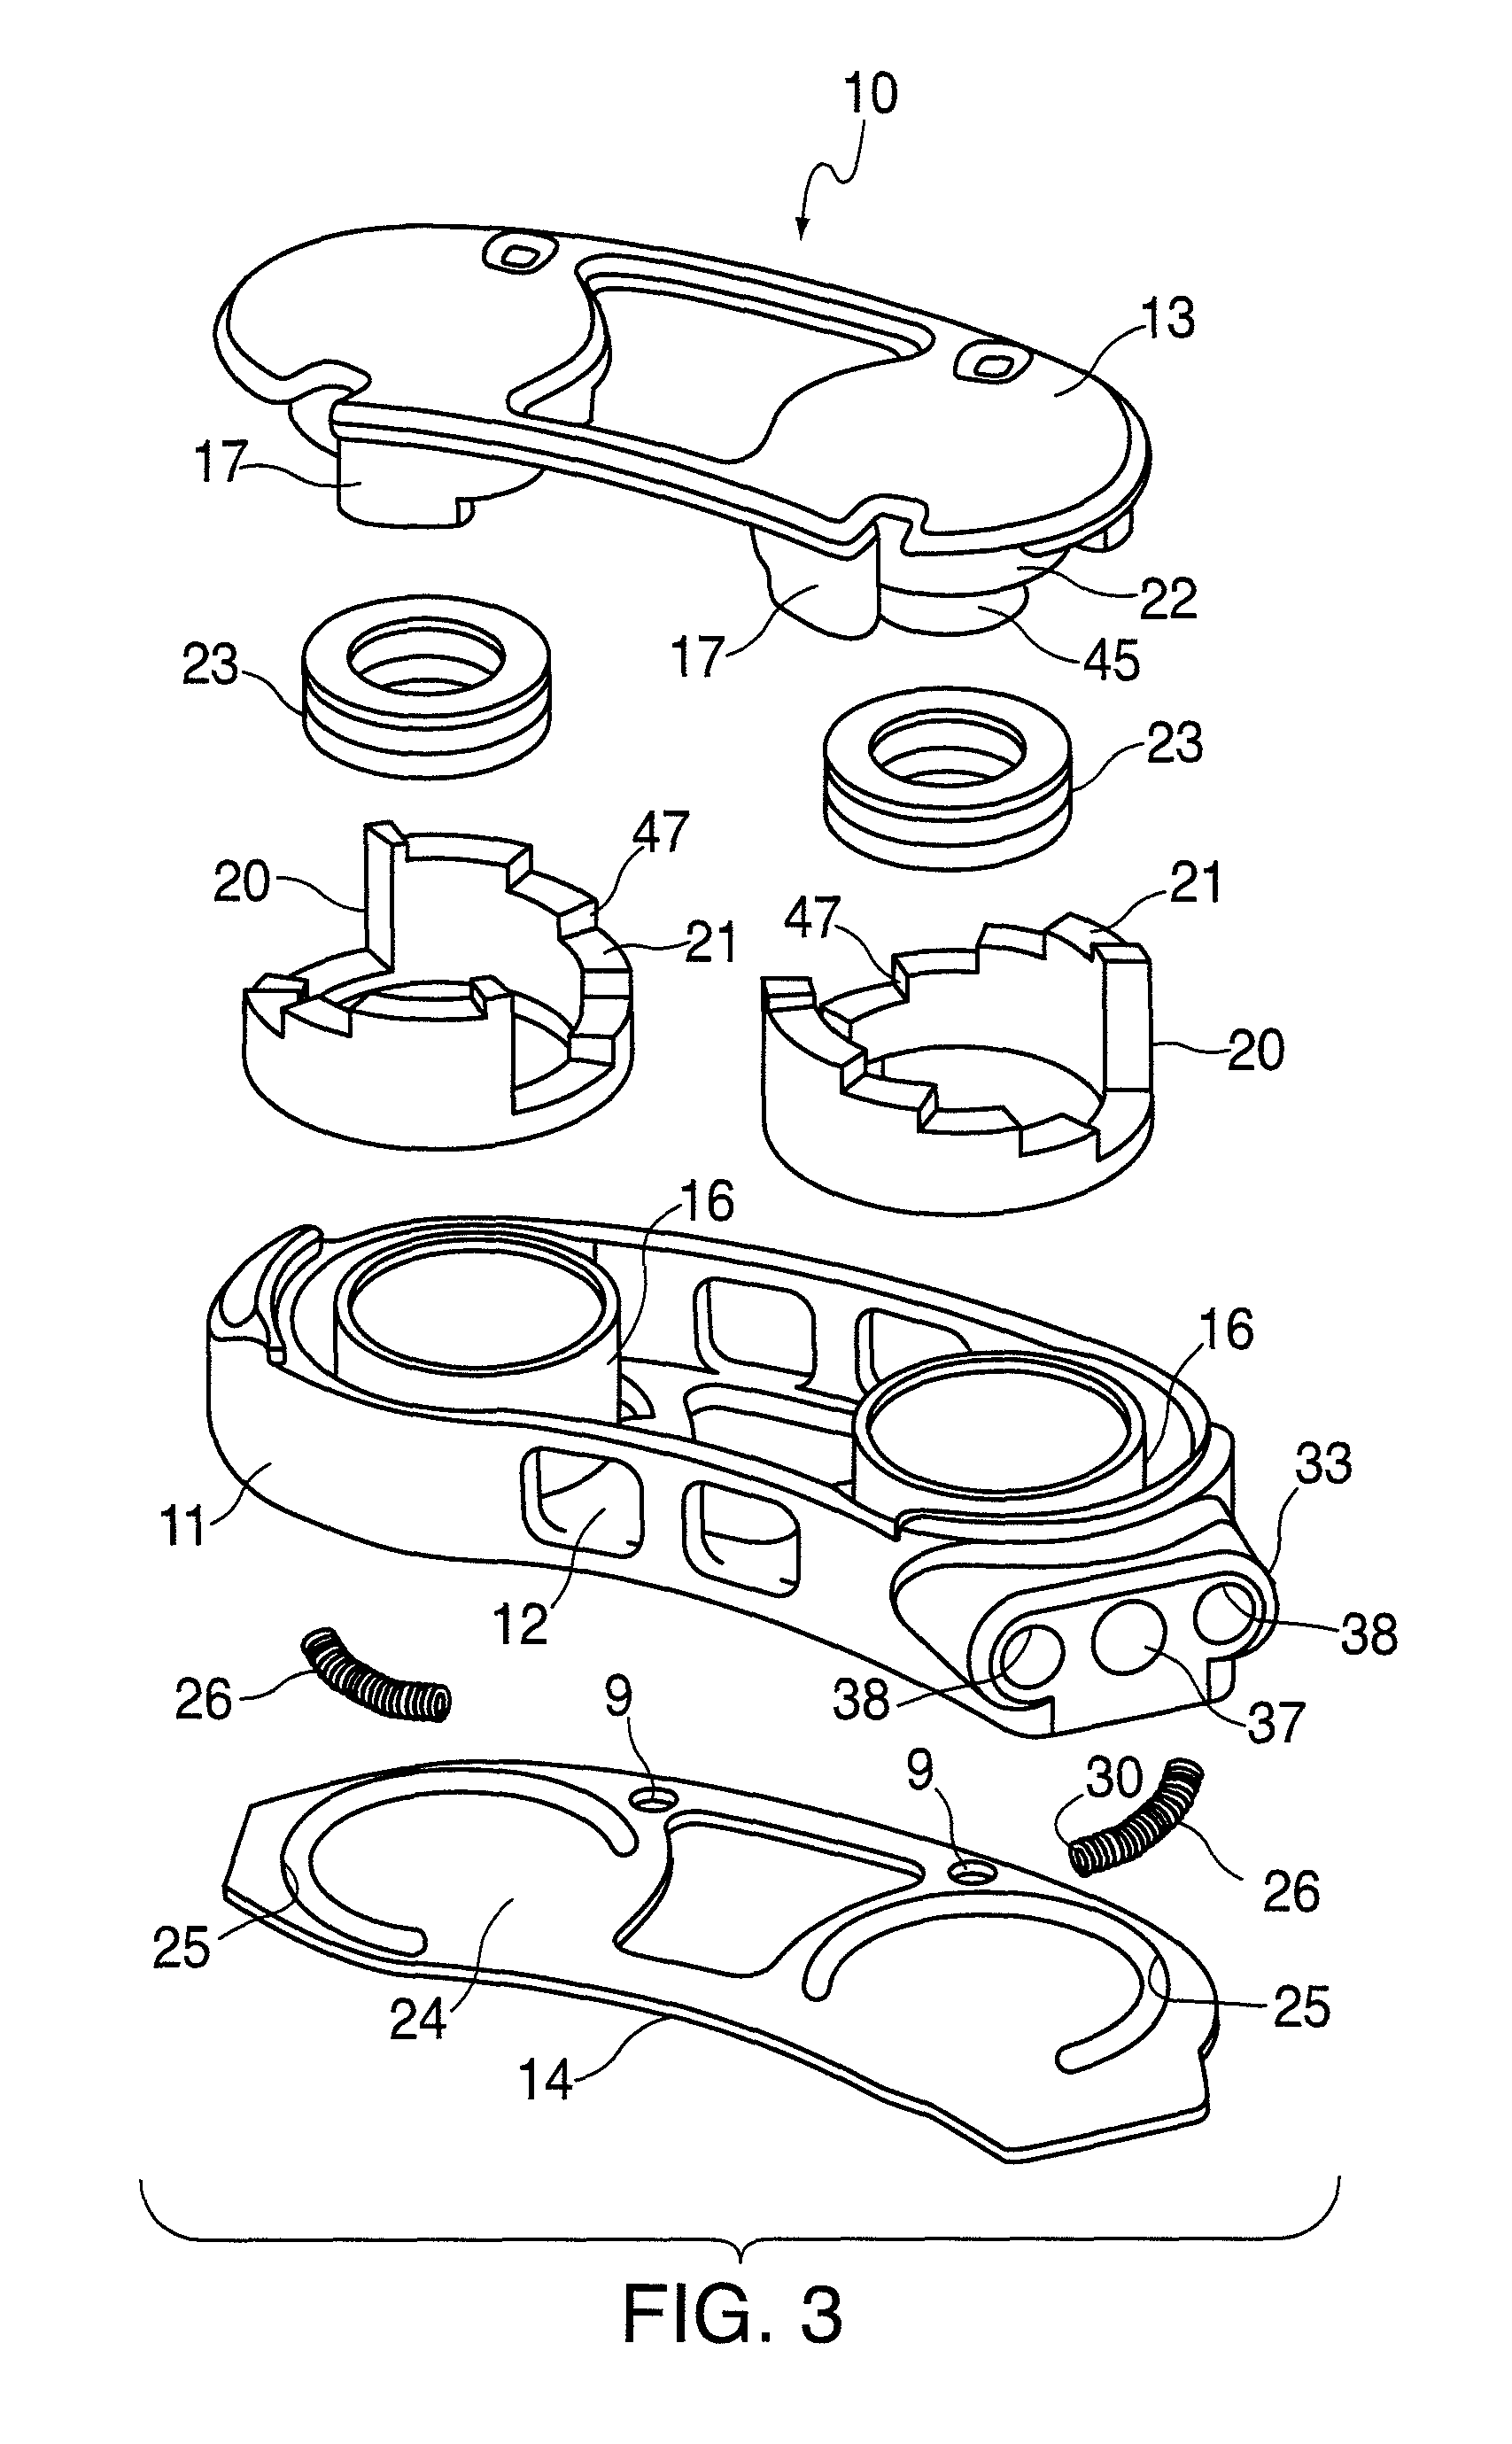 Adjustable distraction cage with linked locking mechanisms